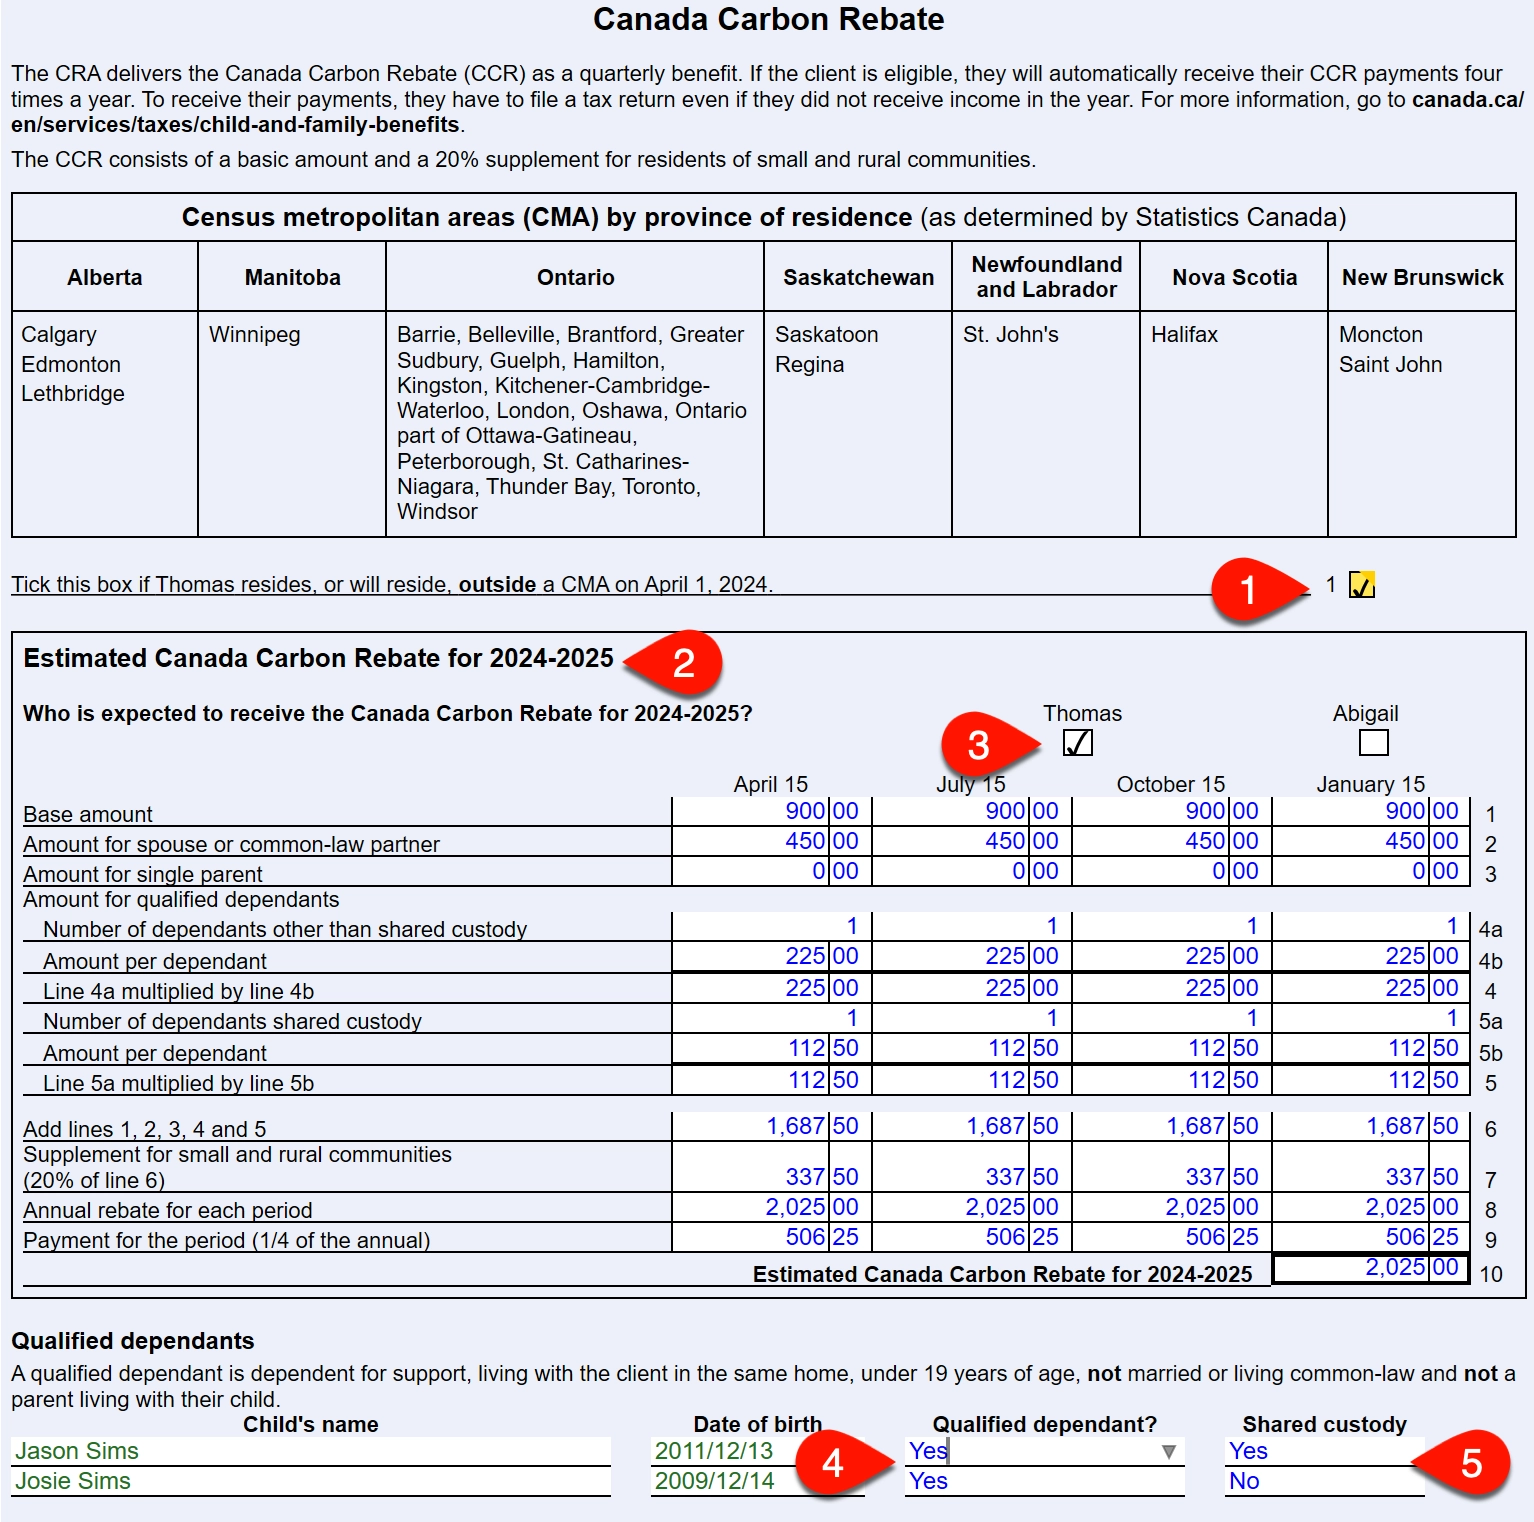 Screen Capture: Climate worksheet with estimated Canada Carbon Rebate